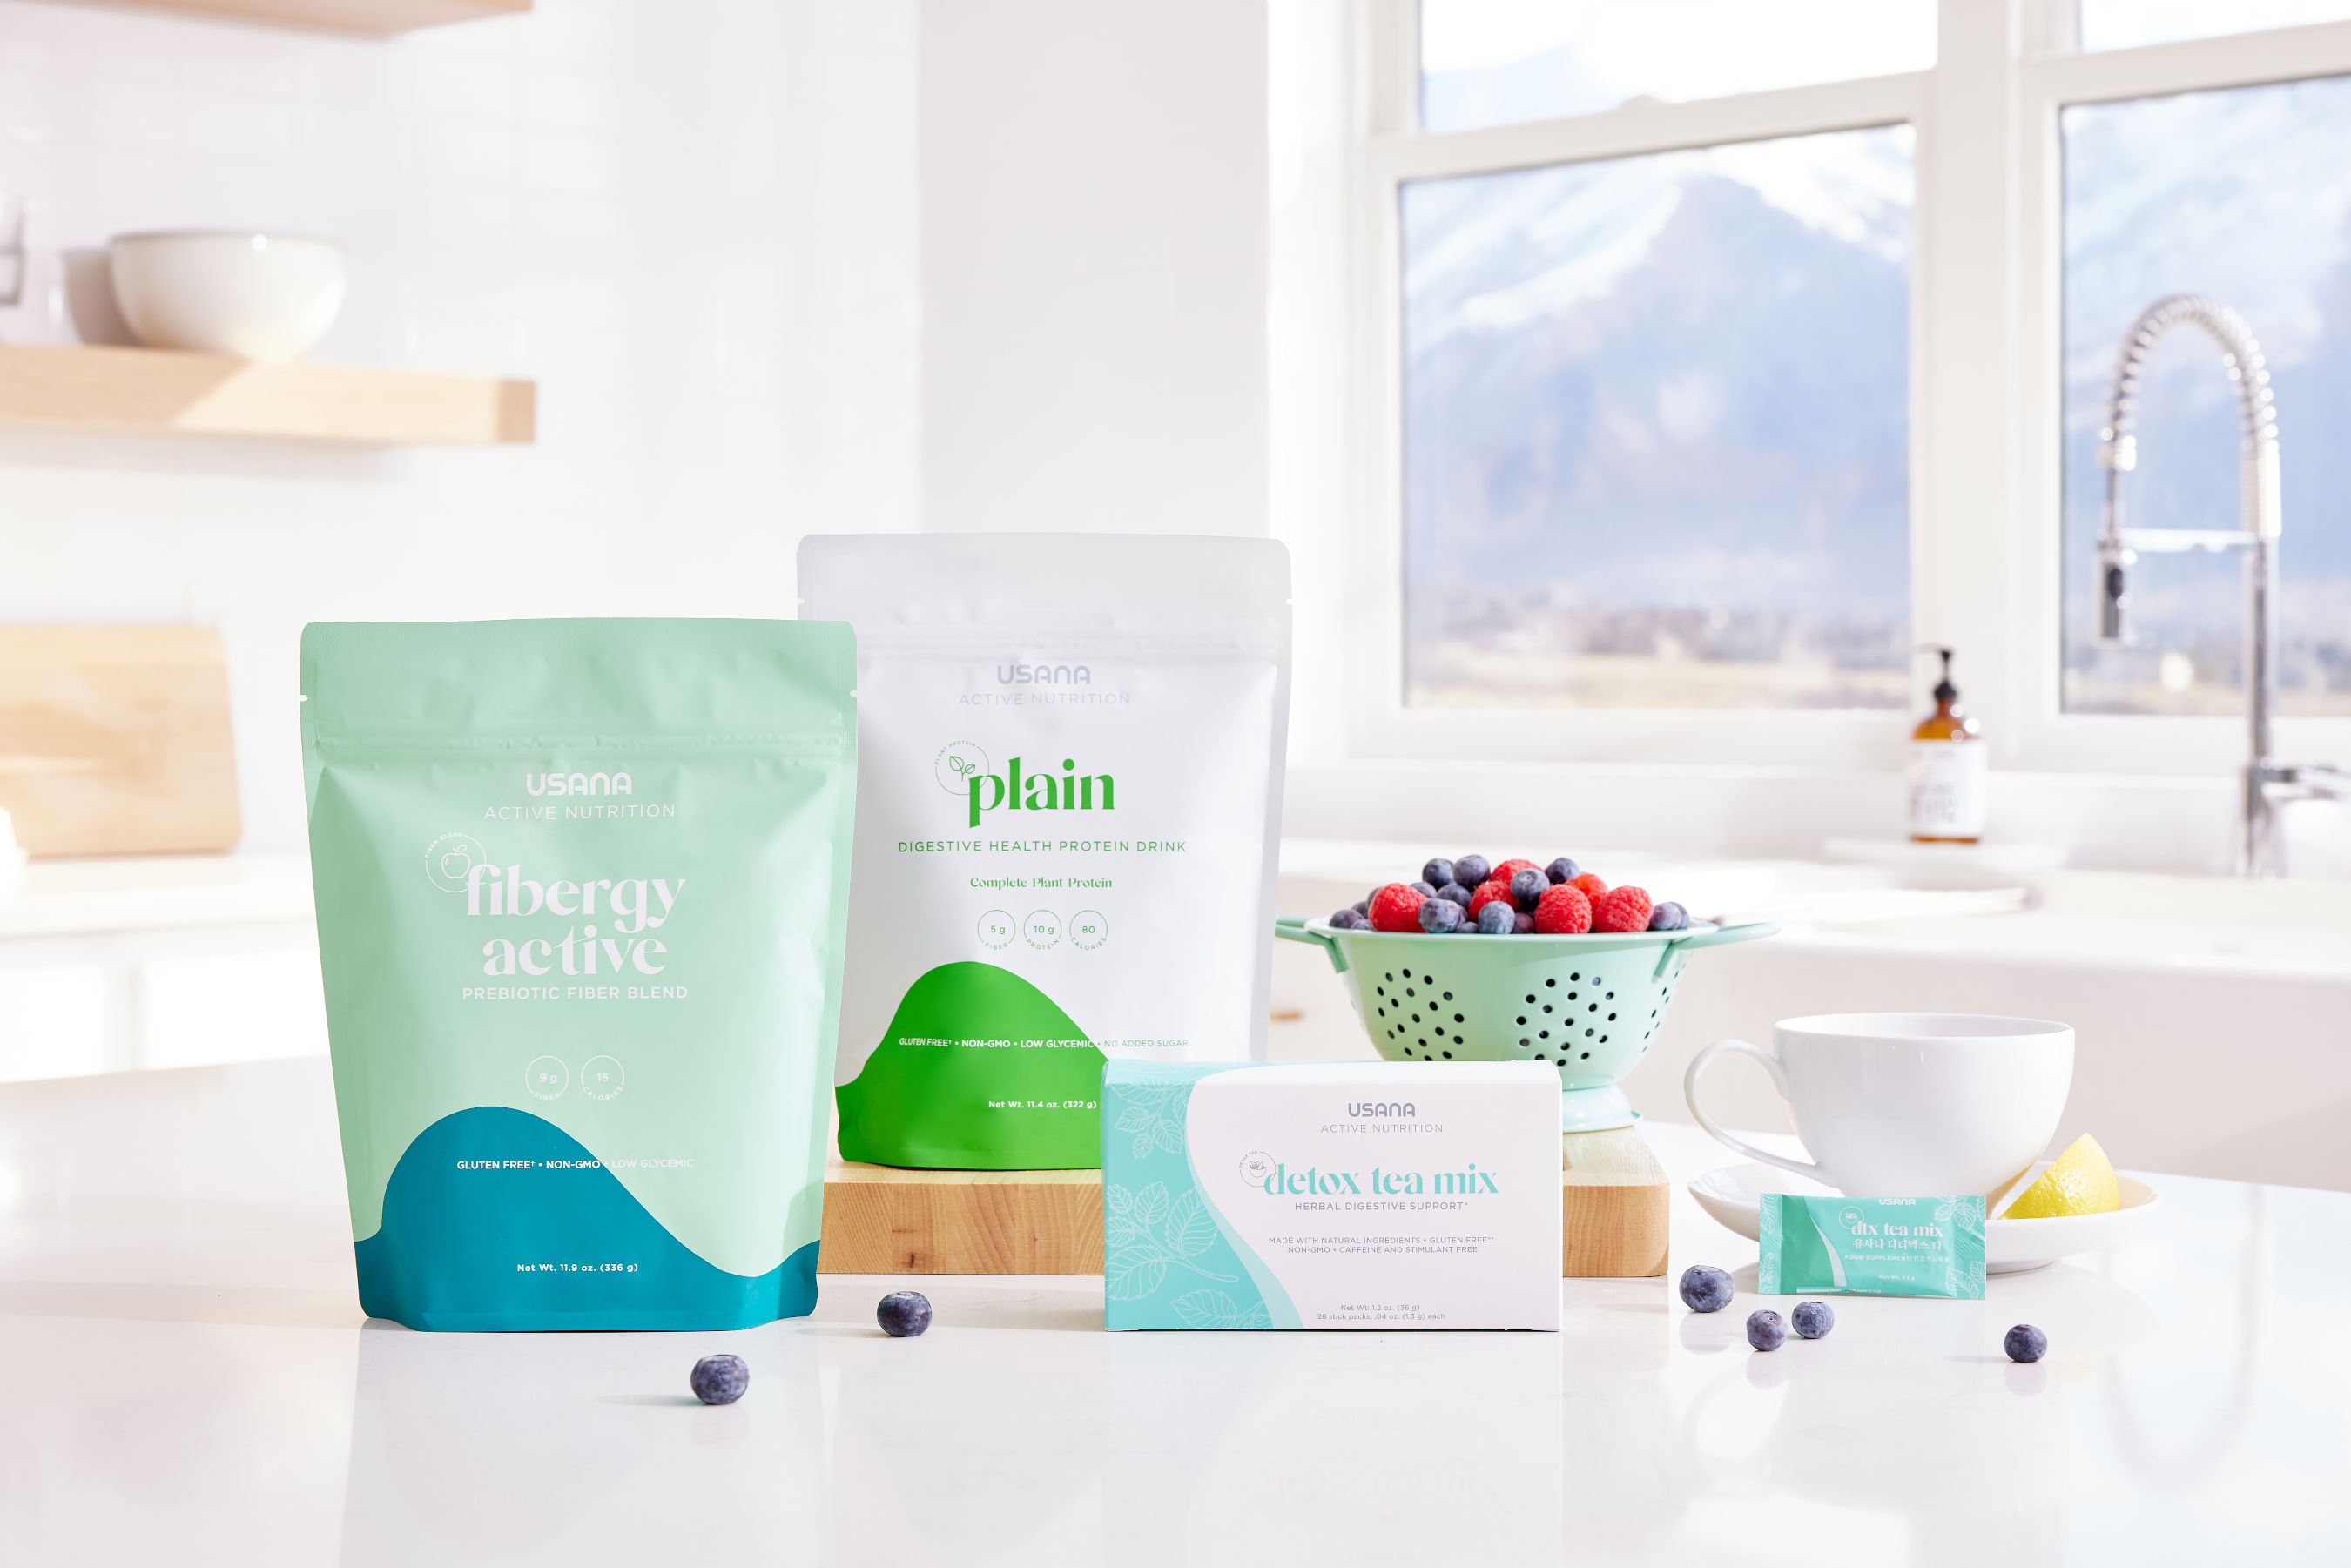 Introducing USANA’s new Active Nutrition line—seven science-based products for whole-body health